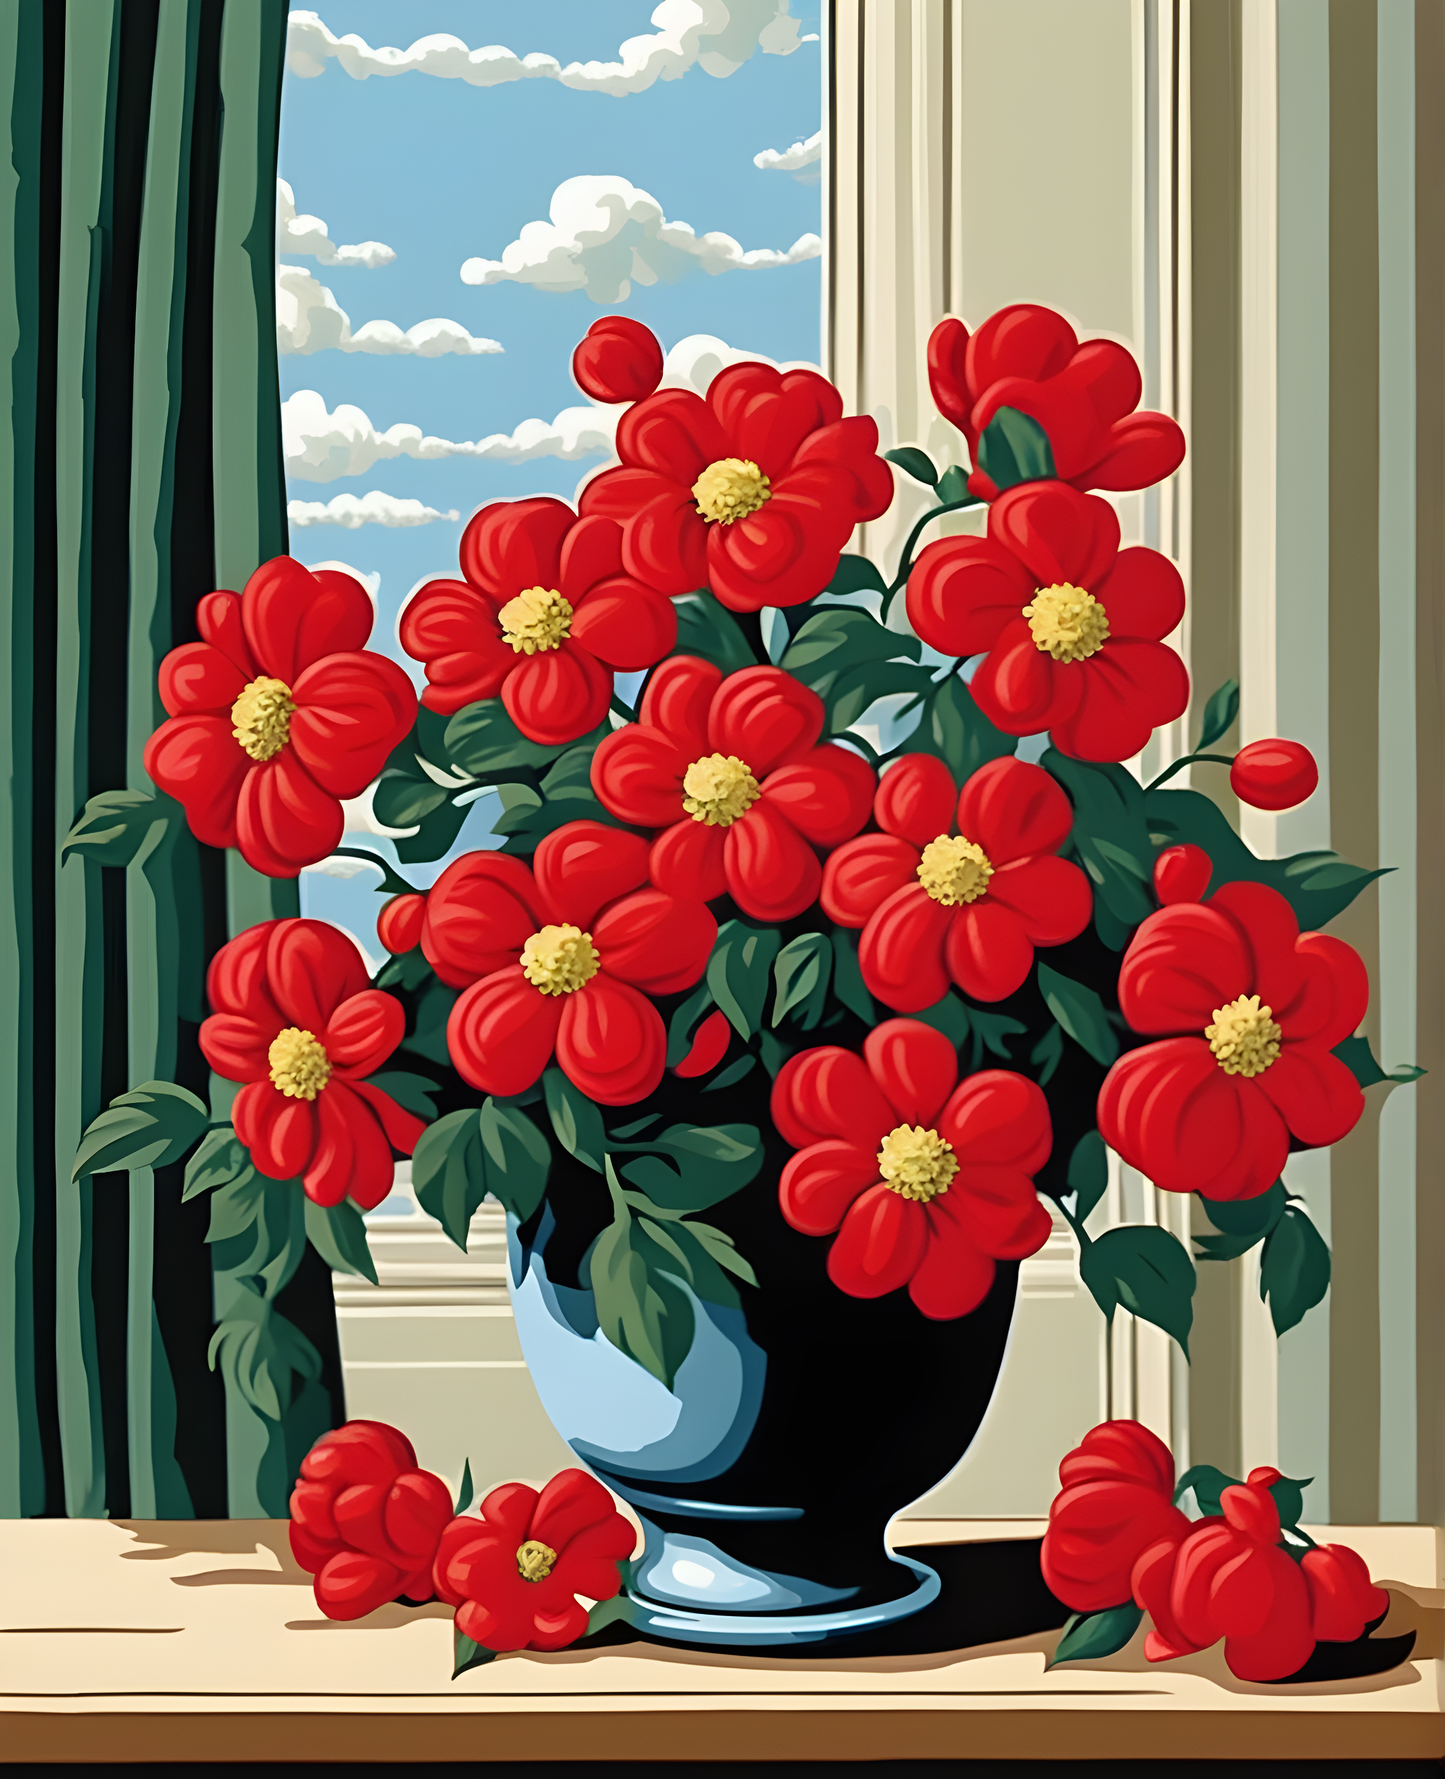 Red Flowers Pot (4) - Van-Go Paint-By-Number Kit